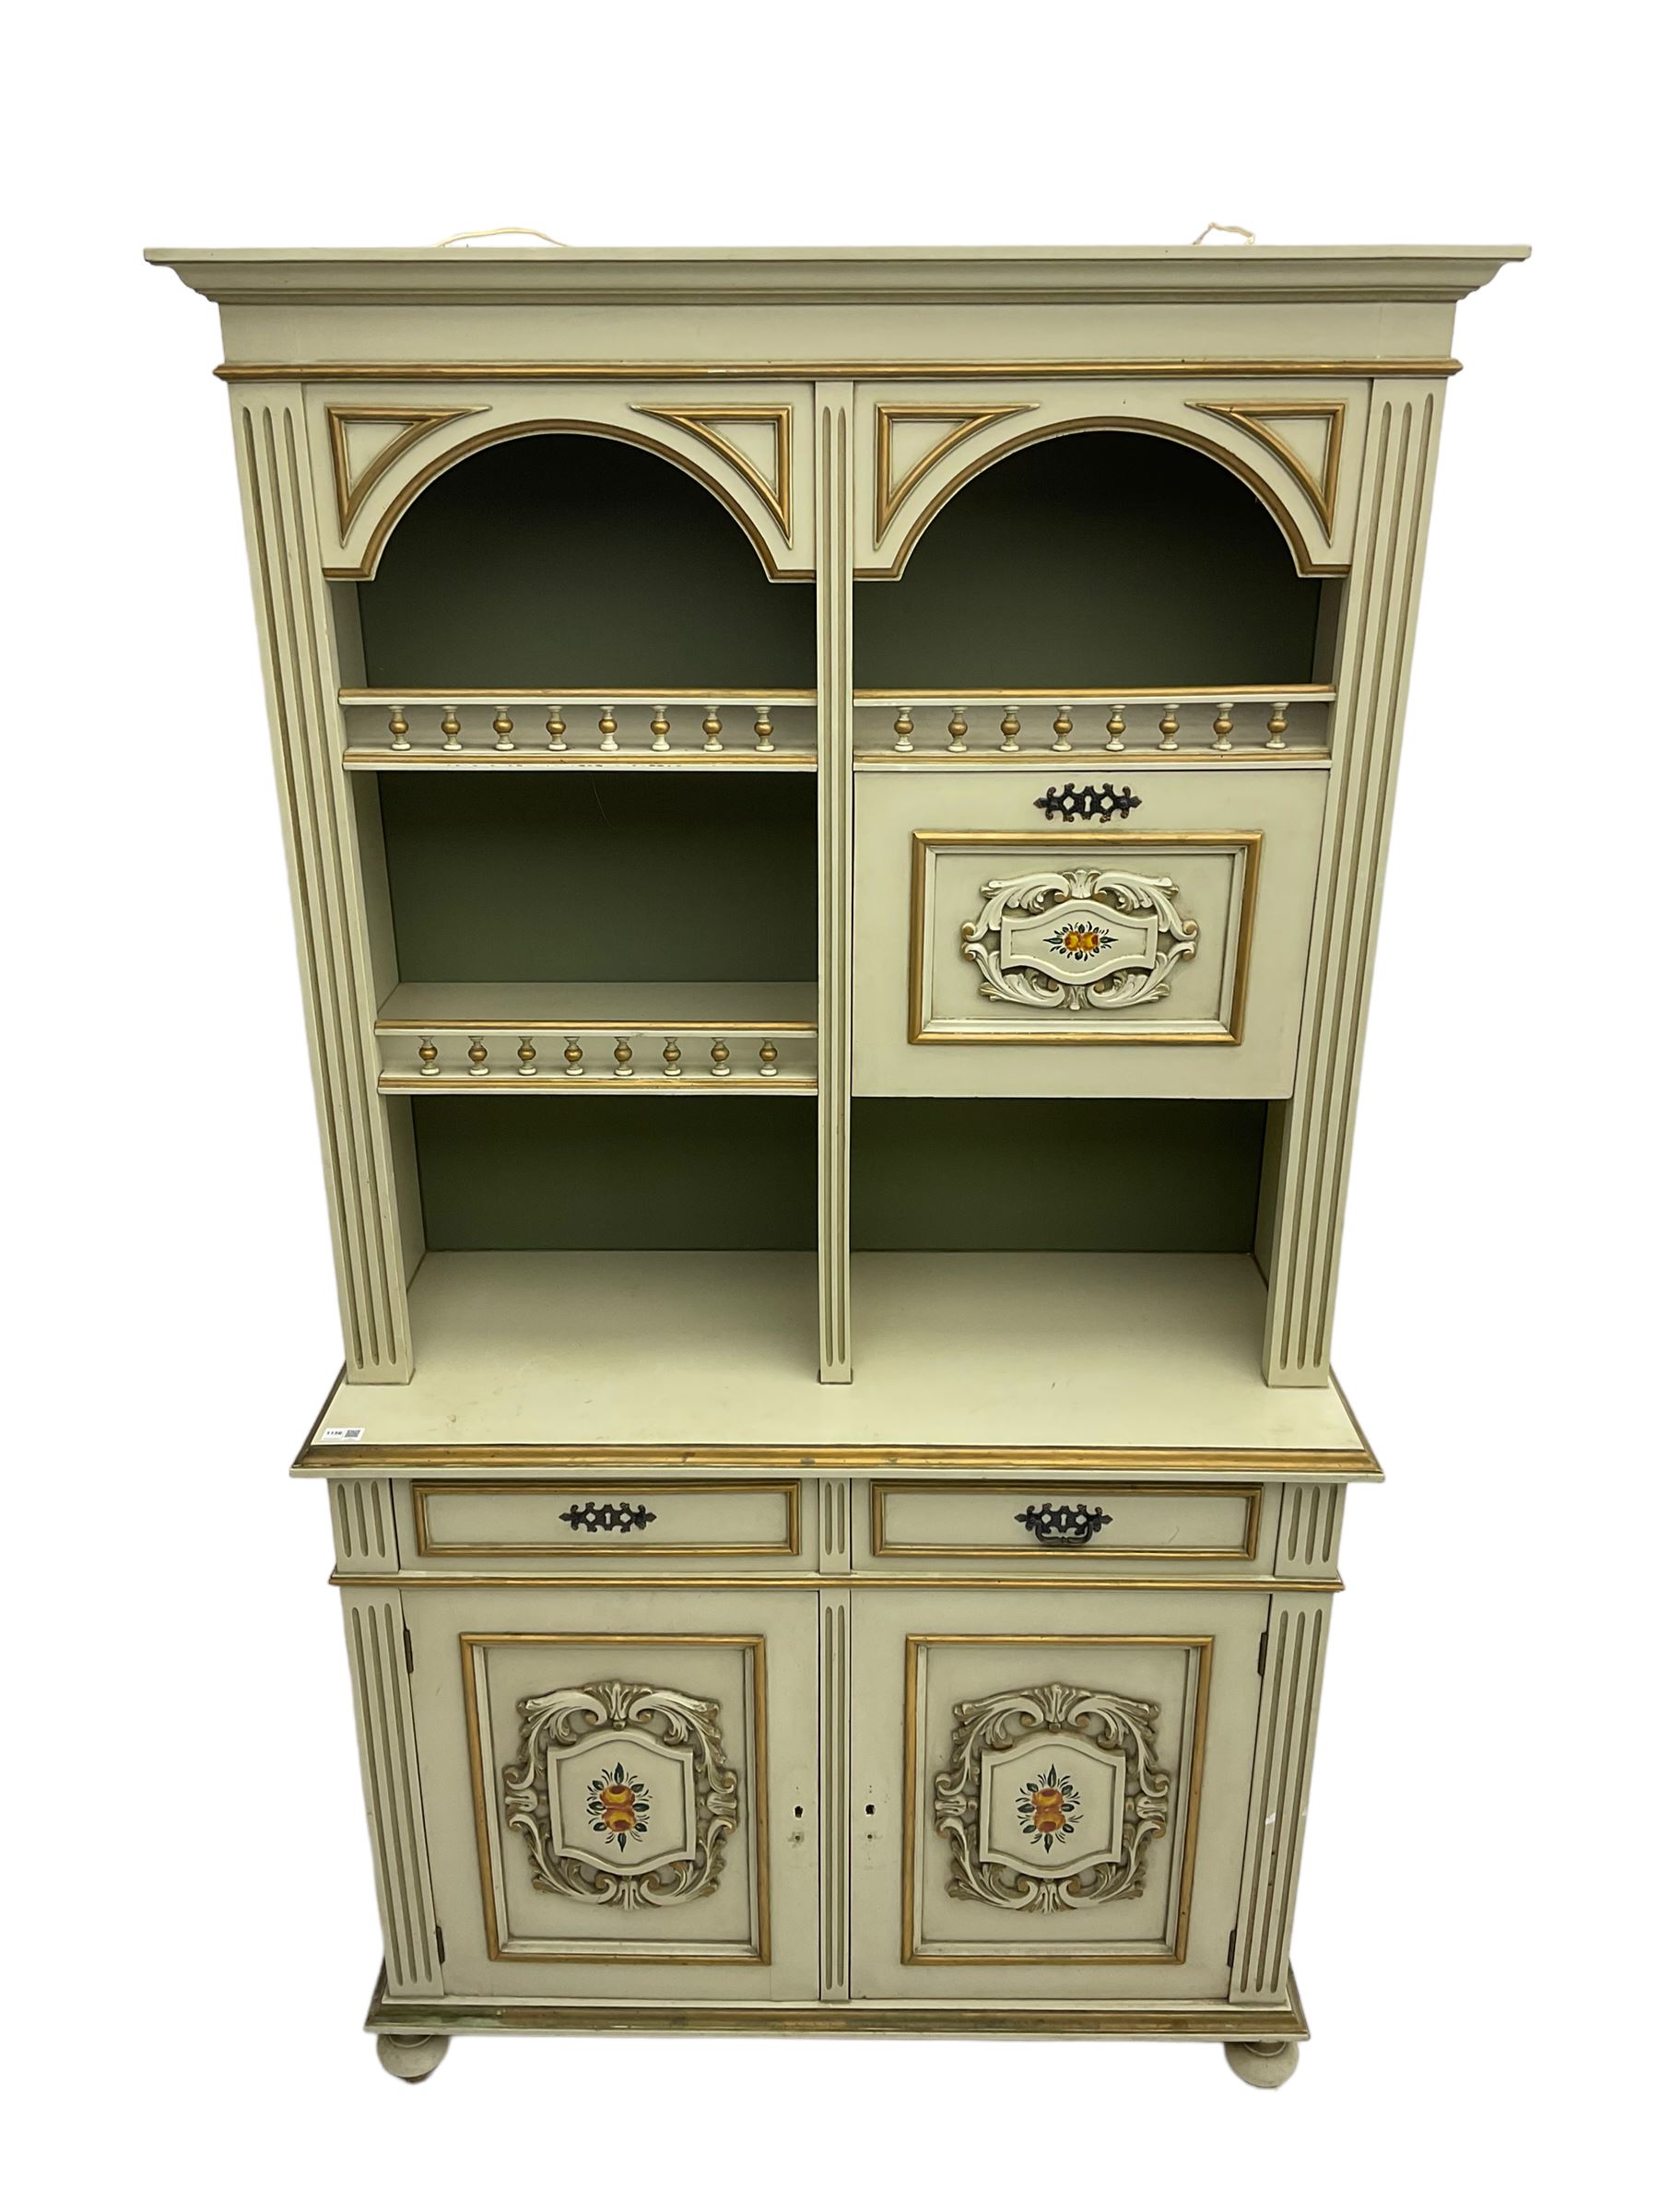 Portuguese painted dresser - Image 2 of 6